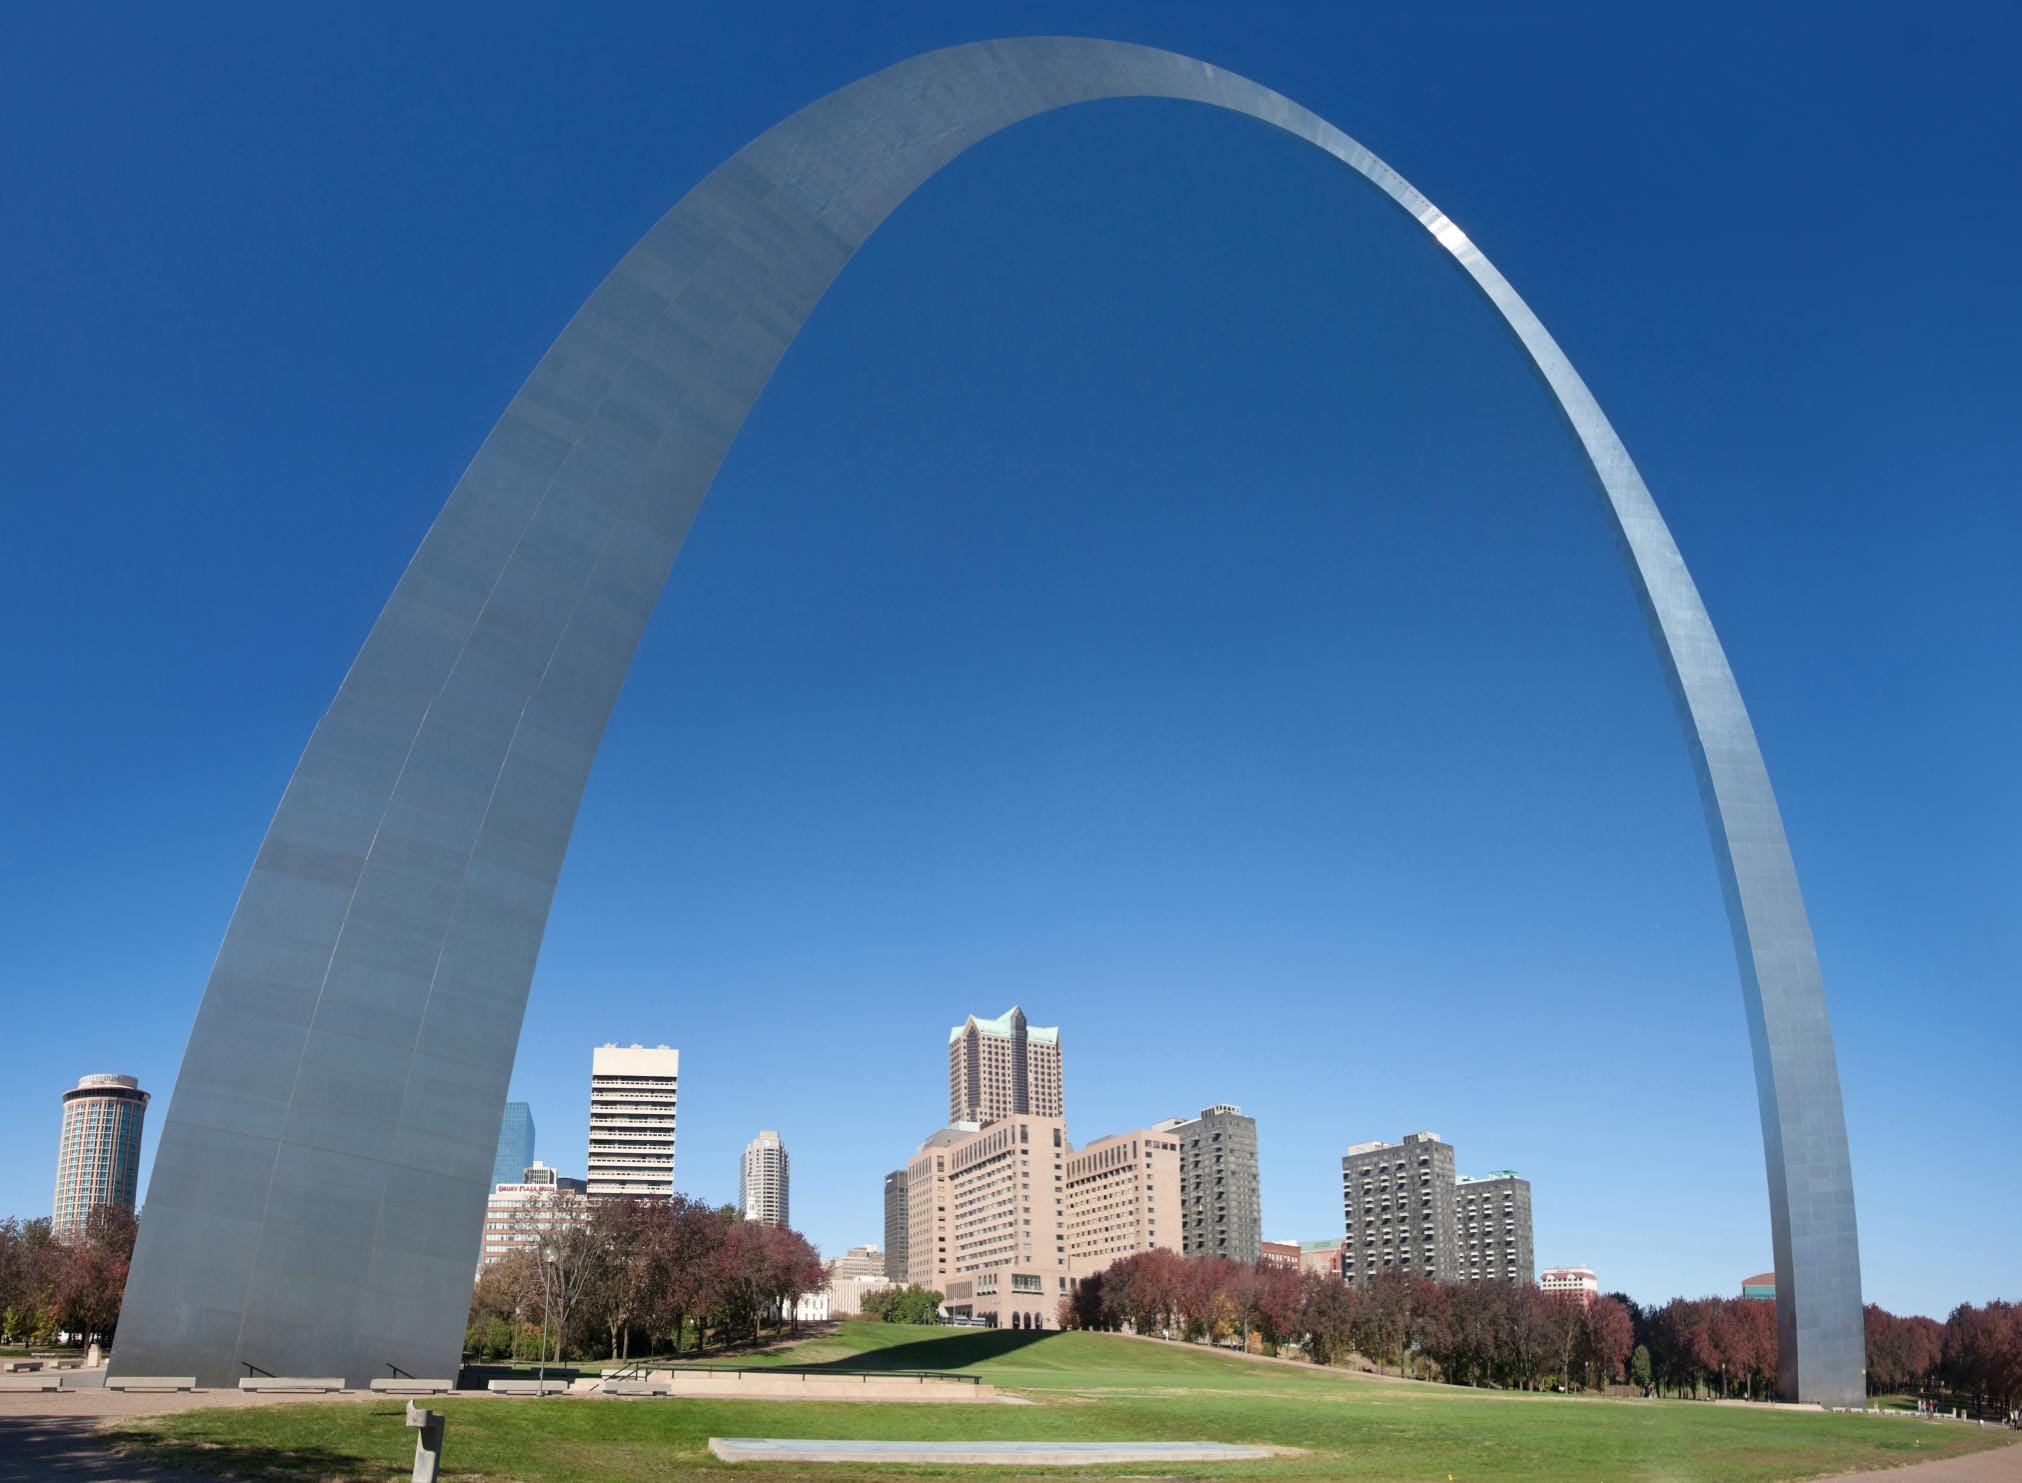 Evolution of Stainless Steel & the Arch Gateway